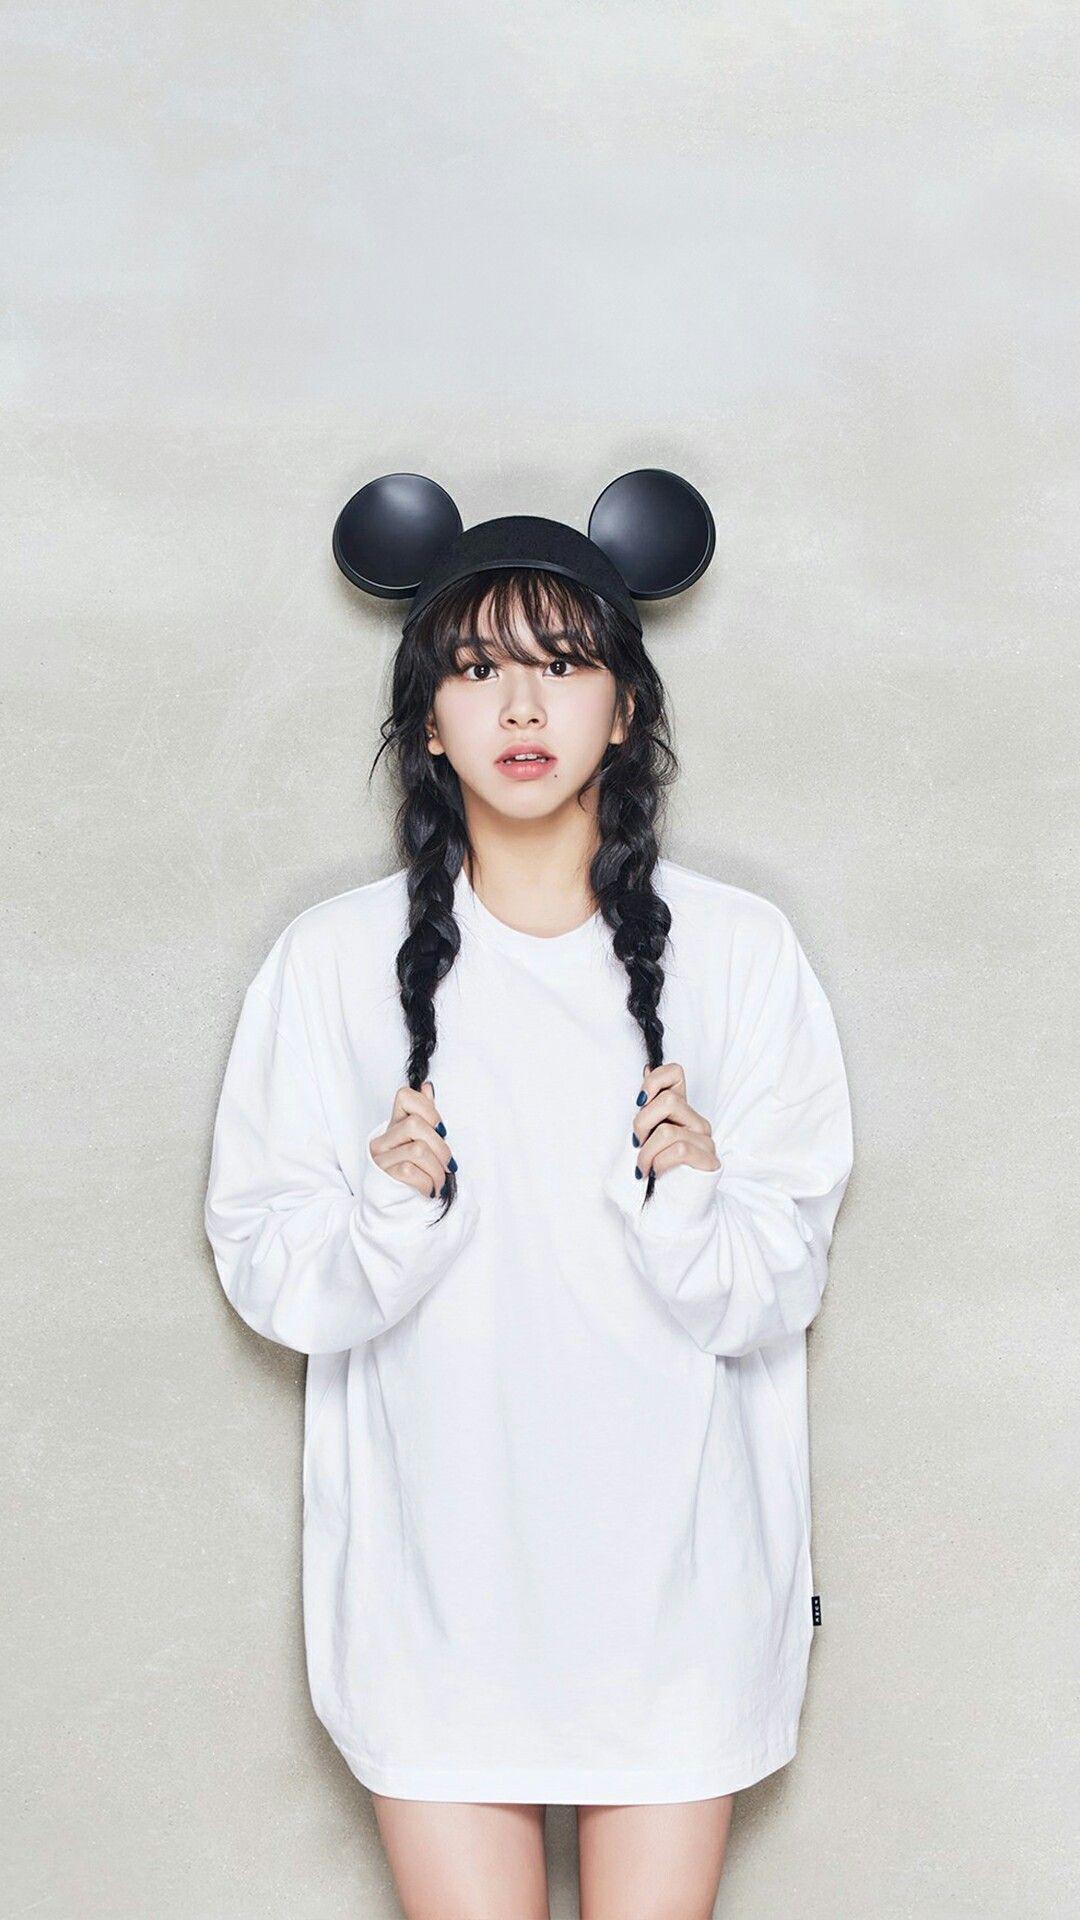 Twice Chaeyoung Wallpaper Free Twice Chaeyoung